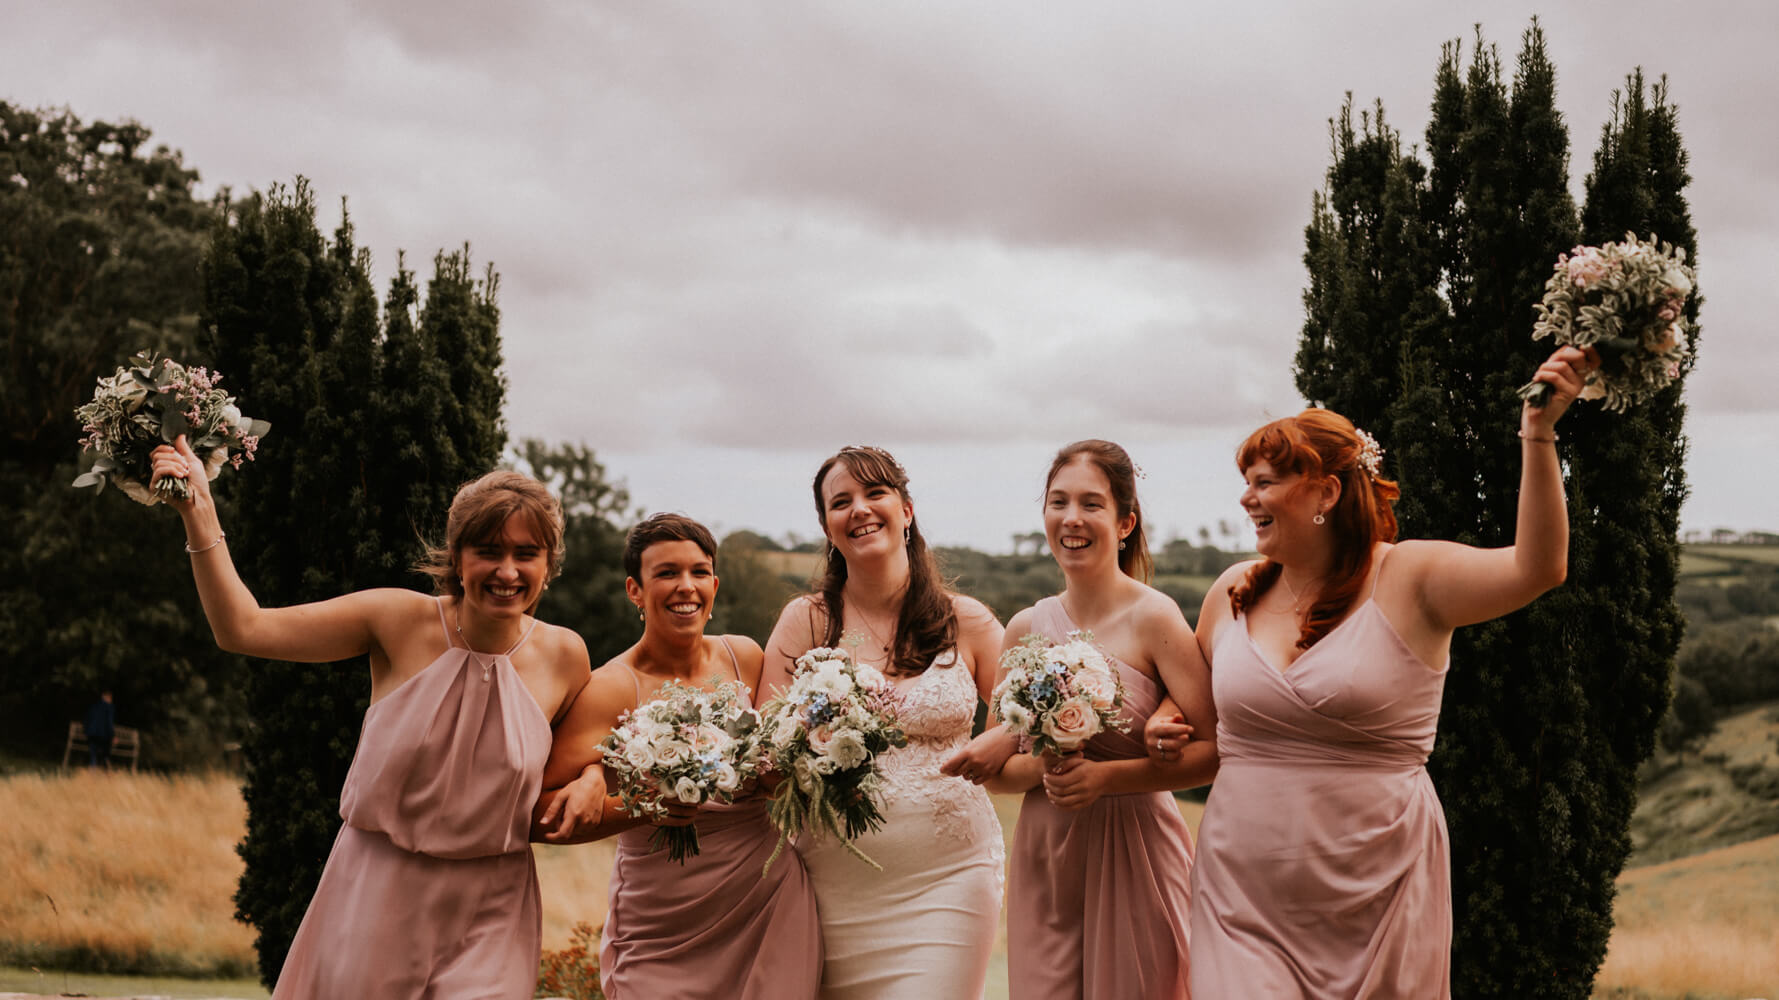 Lucy and bridesmaids